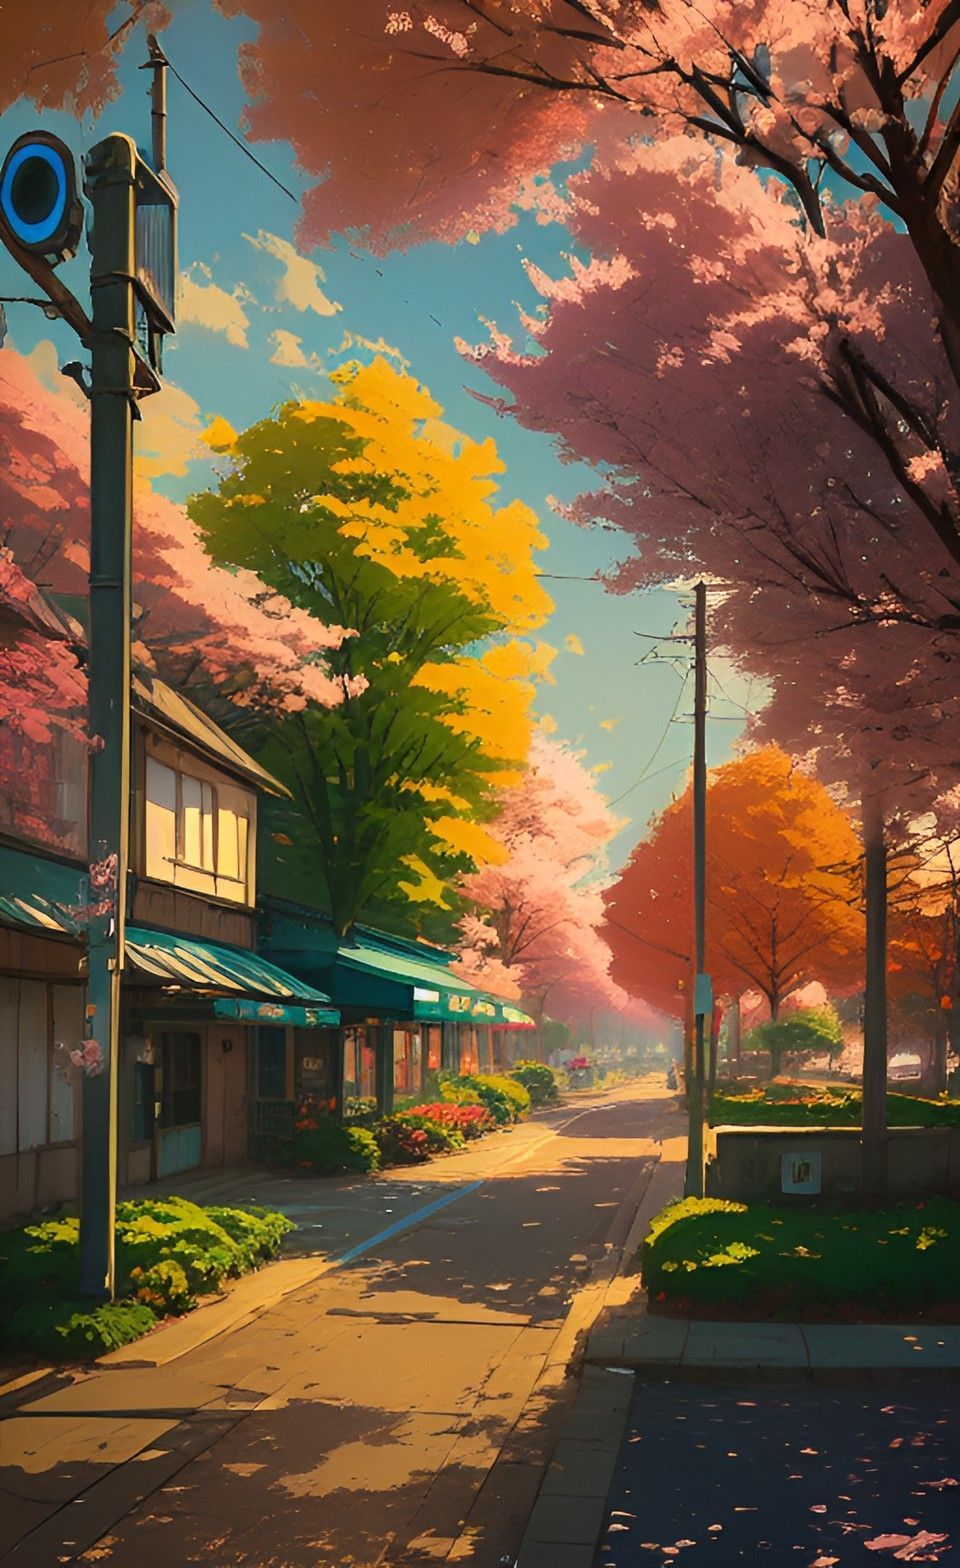 A beautiful scenery of a street with cherry blossom trees in the spring - Anime landscape